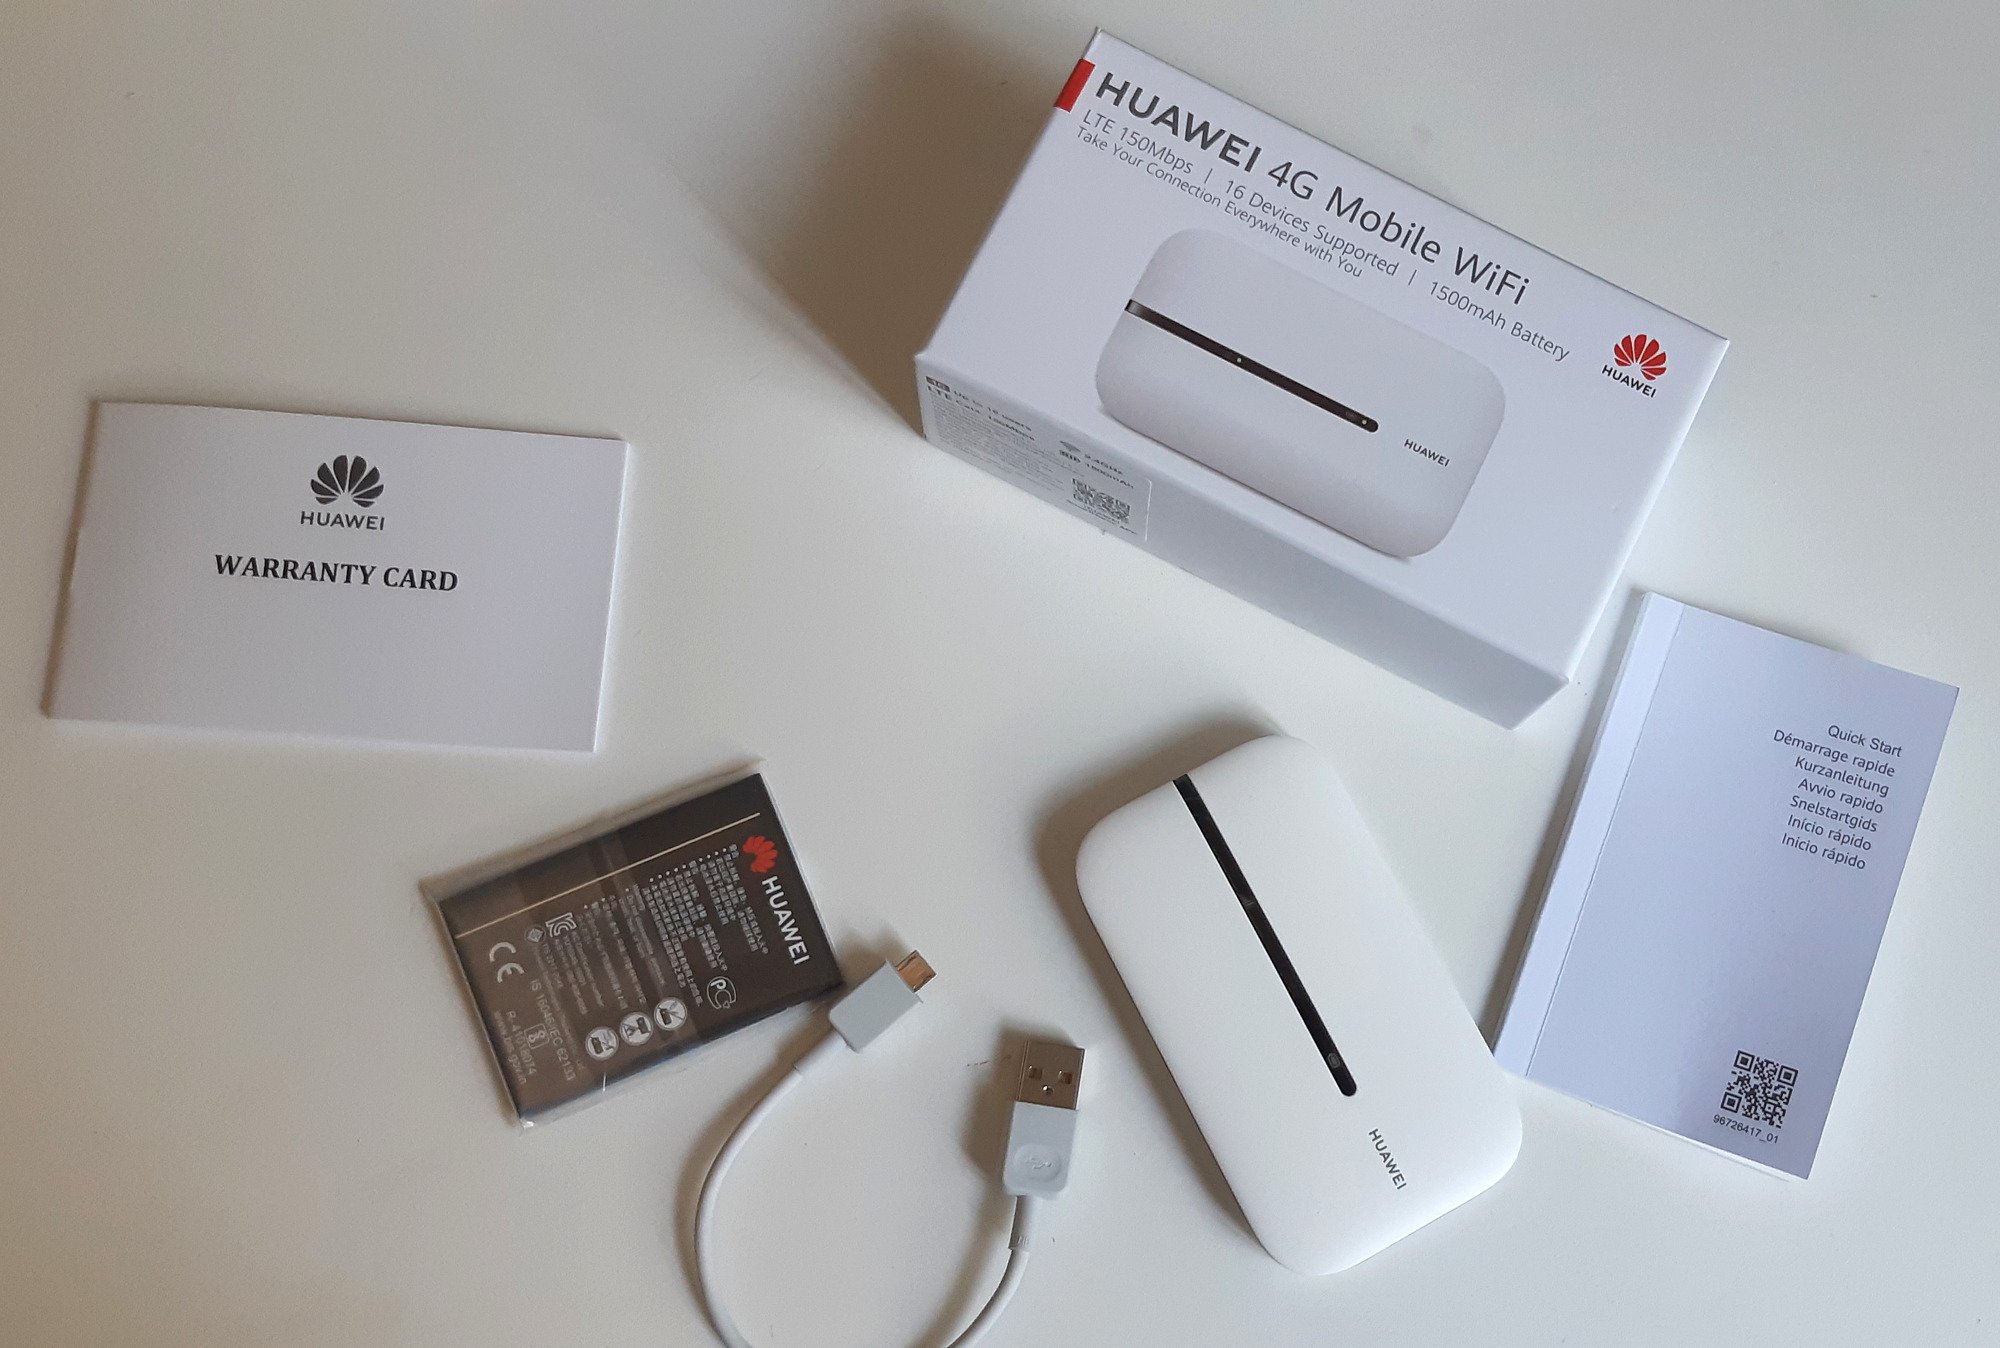 Media asset in full size related to 3dfxzone.it news item entitled as follows: Unboxing Router Huawei 4G Mobile WiFi (model number: E5576-320) | Image Name: news30973_Router-4G-Huawei-E5576-320_1.png